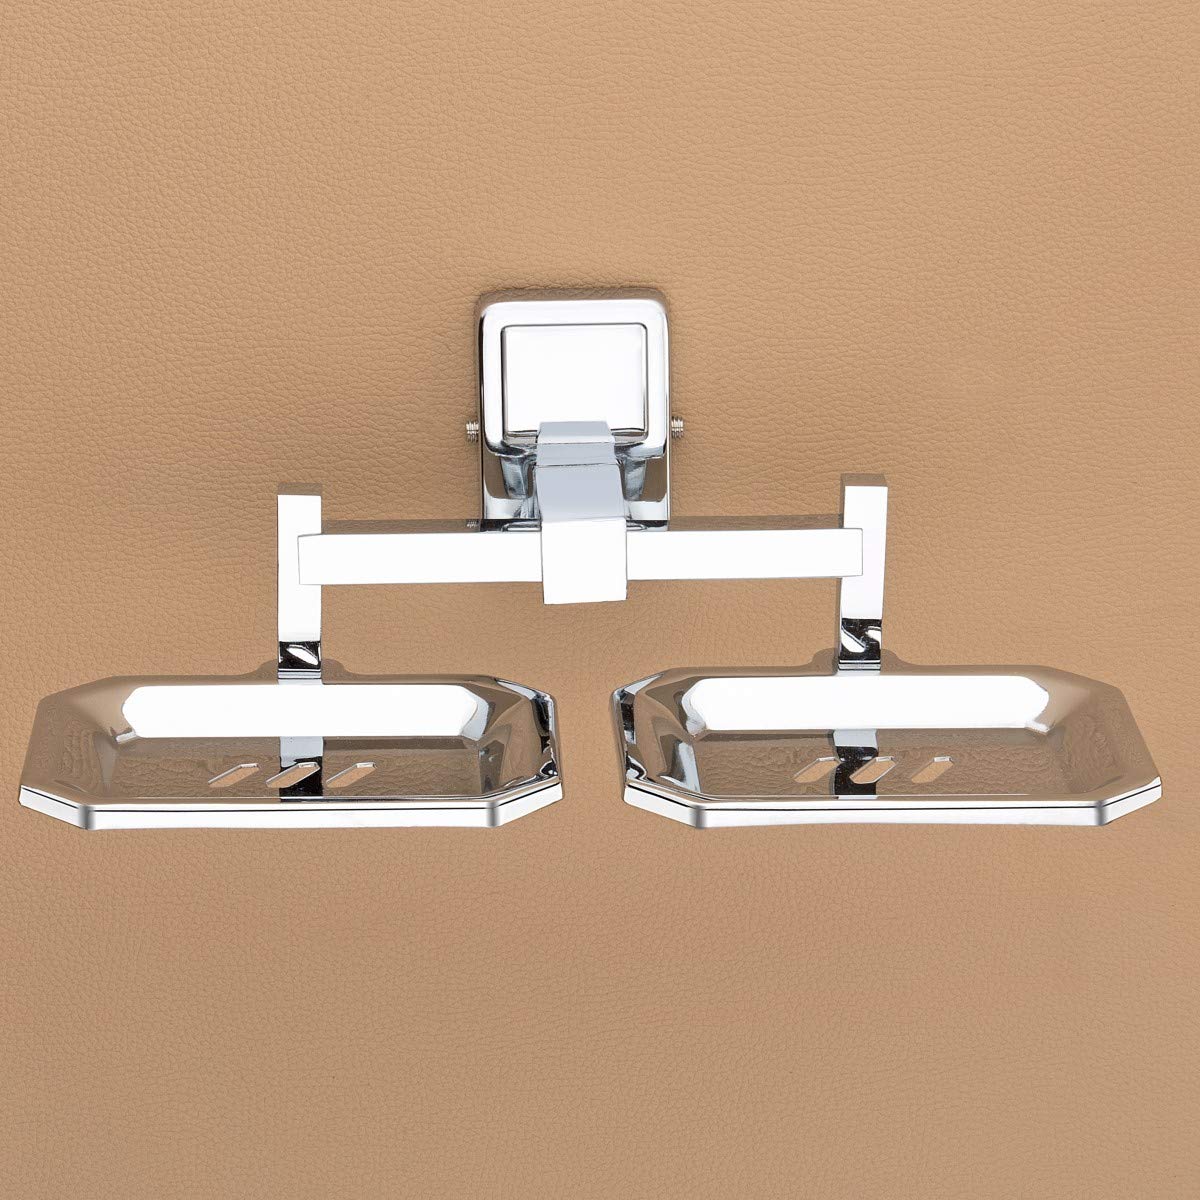 Plantex Stainless Steel 304 Grade Darcy Soap Holder for Bathroom/Soap Dish/Bathroom Soap Stand/Bathroom Accessories(Chrome) - Pack of 3